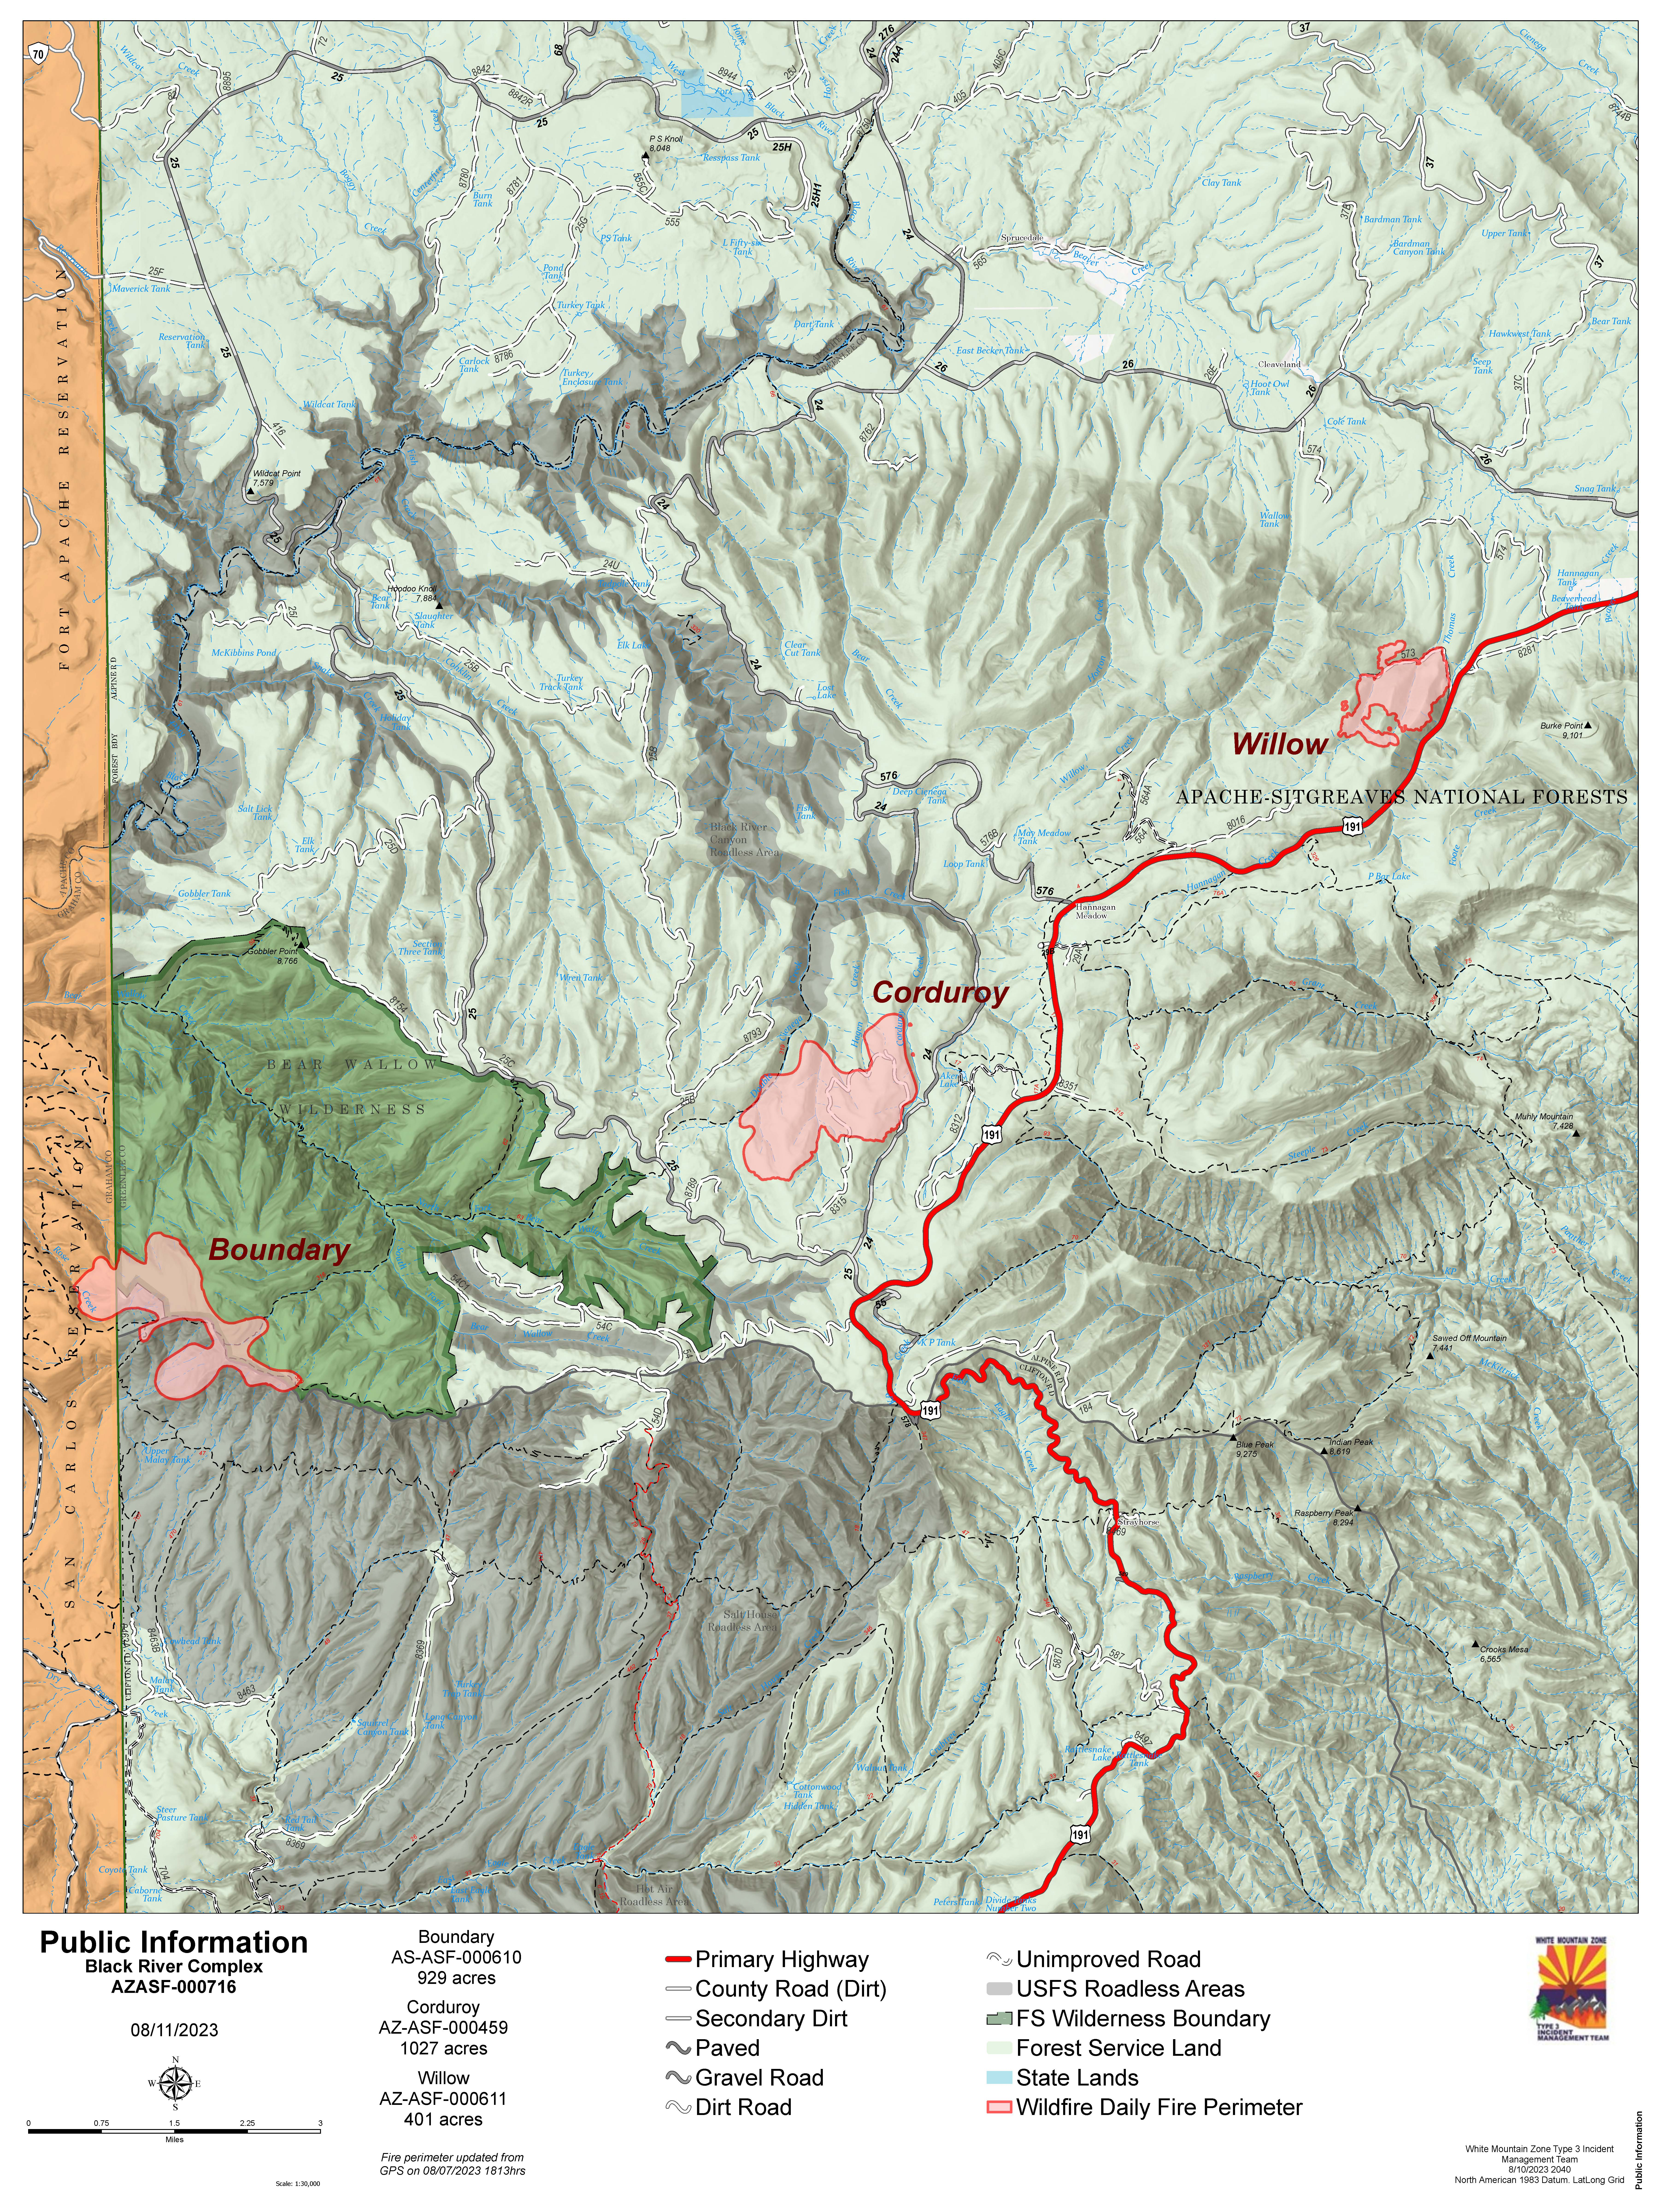 A map of the Black River Complex fire August 11 2023